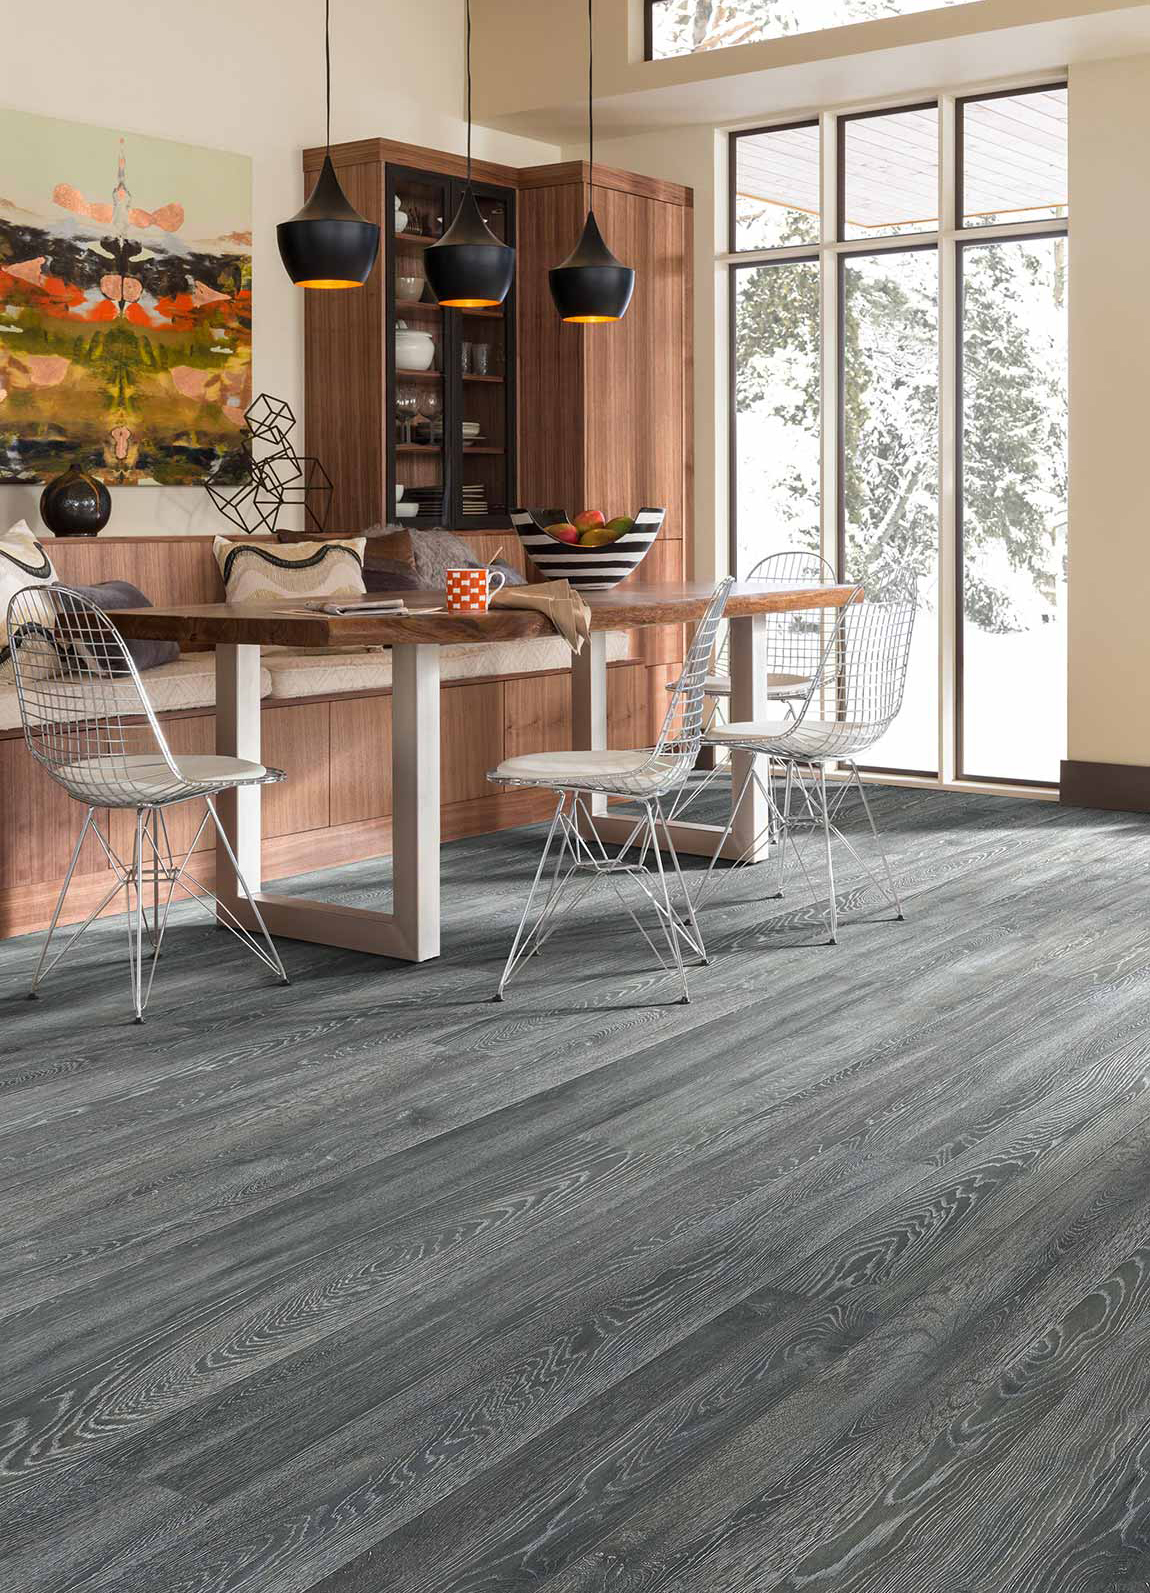 Grand Mountain Wood-look laminate by Shaw Floors. Gray color in kitchen setting